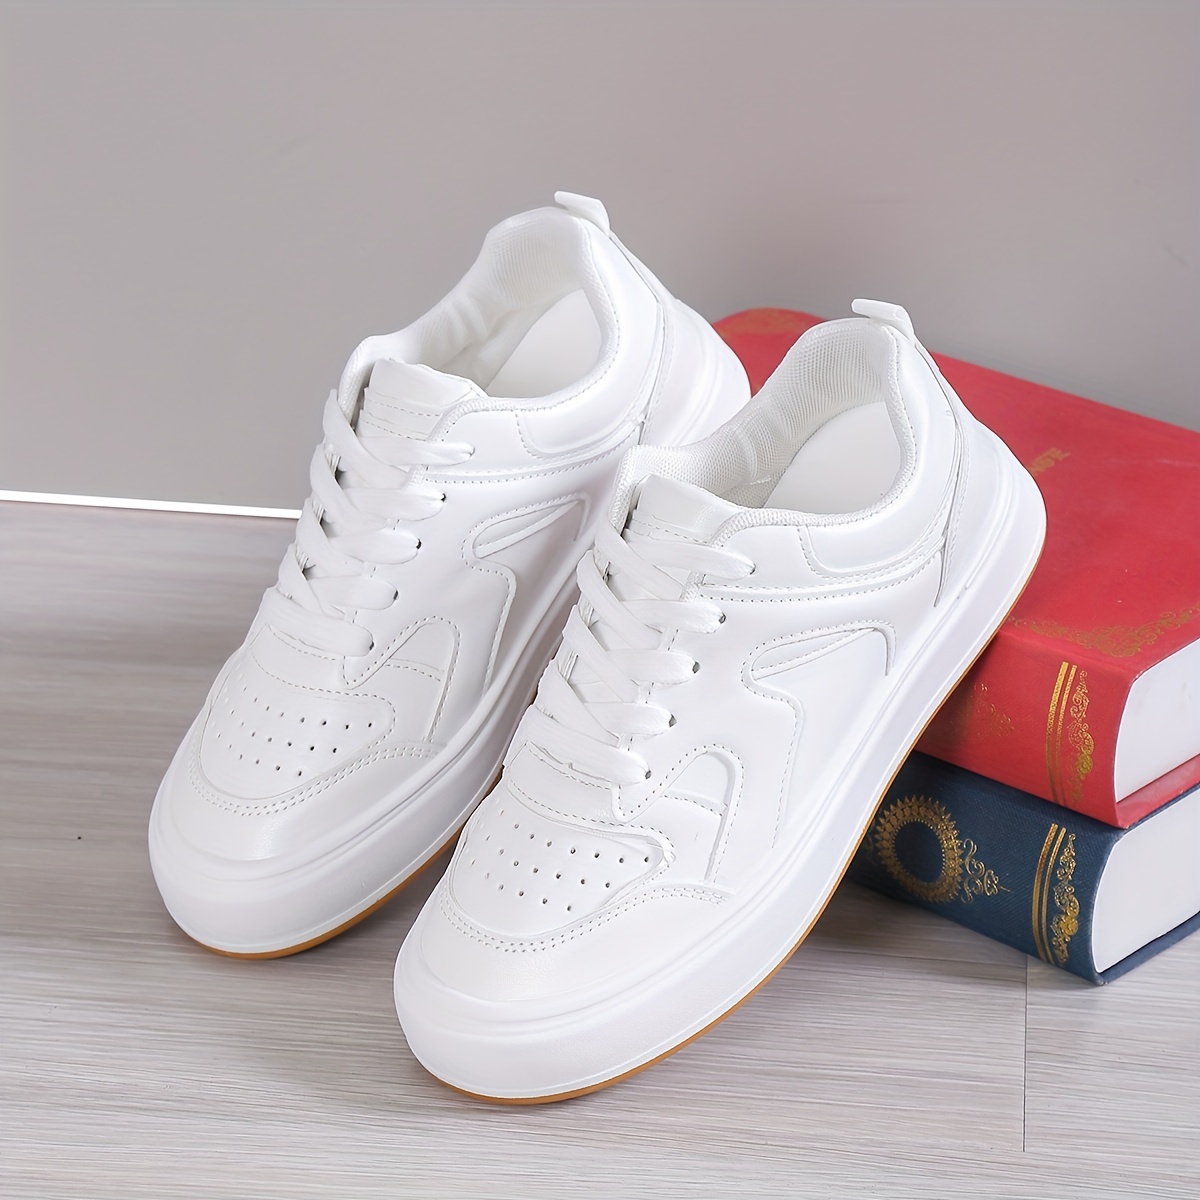 womens colorblock skate shoes versatile low top lace up sports shoes casual flat sneakers details 4